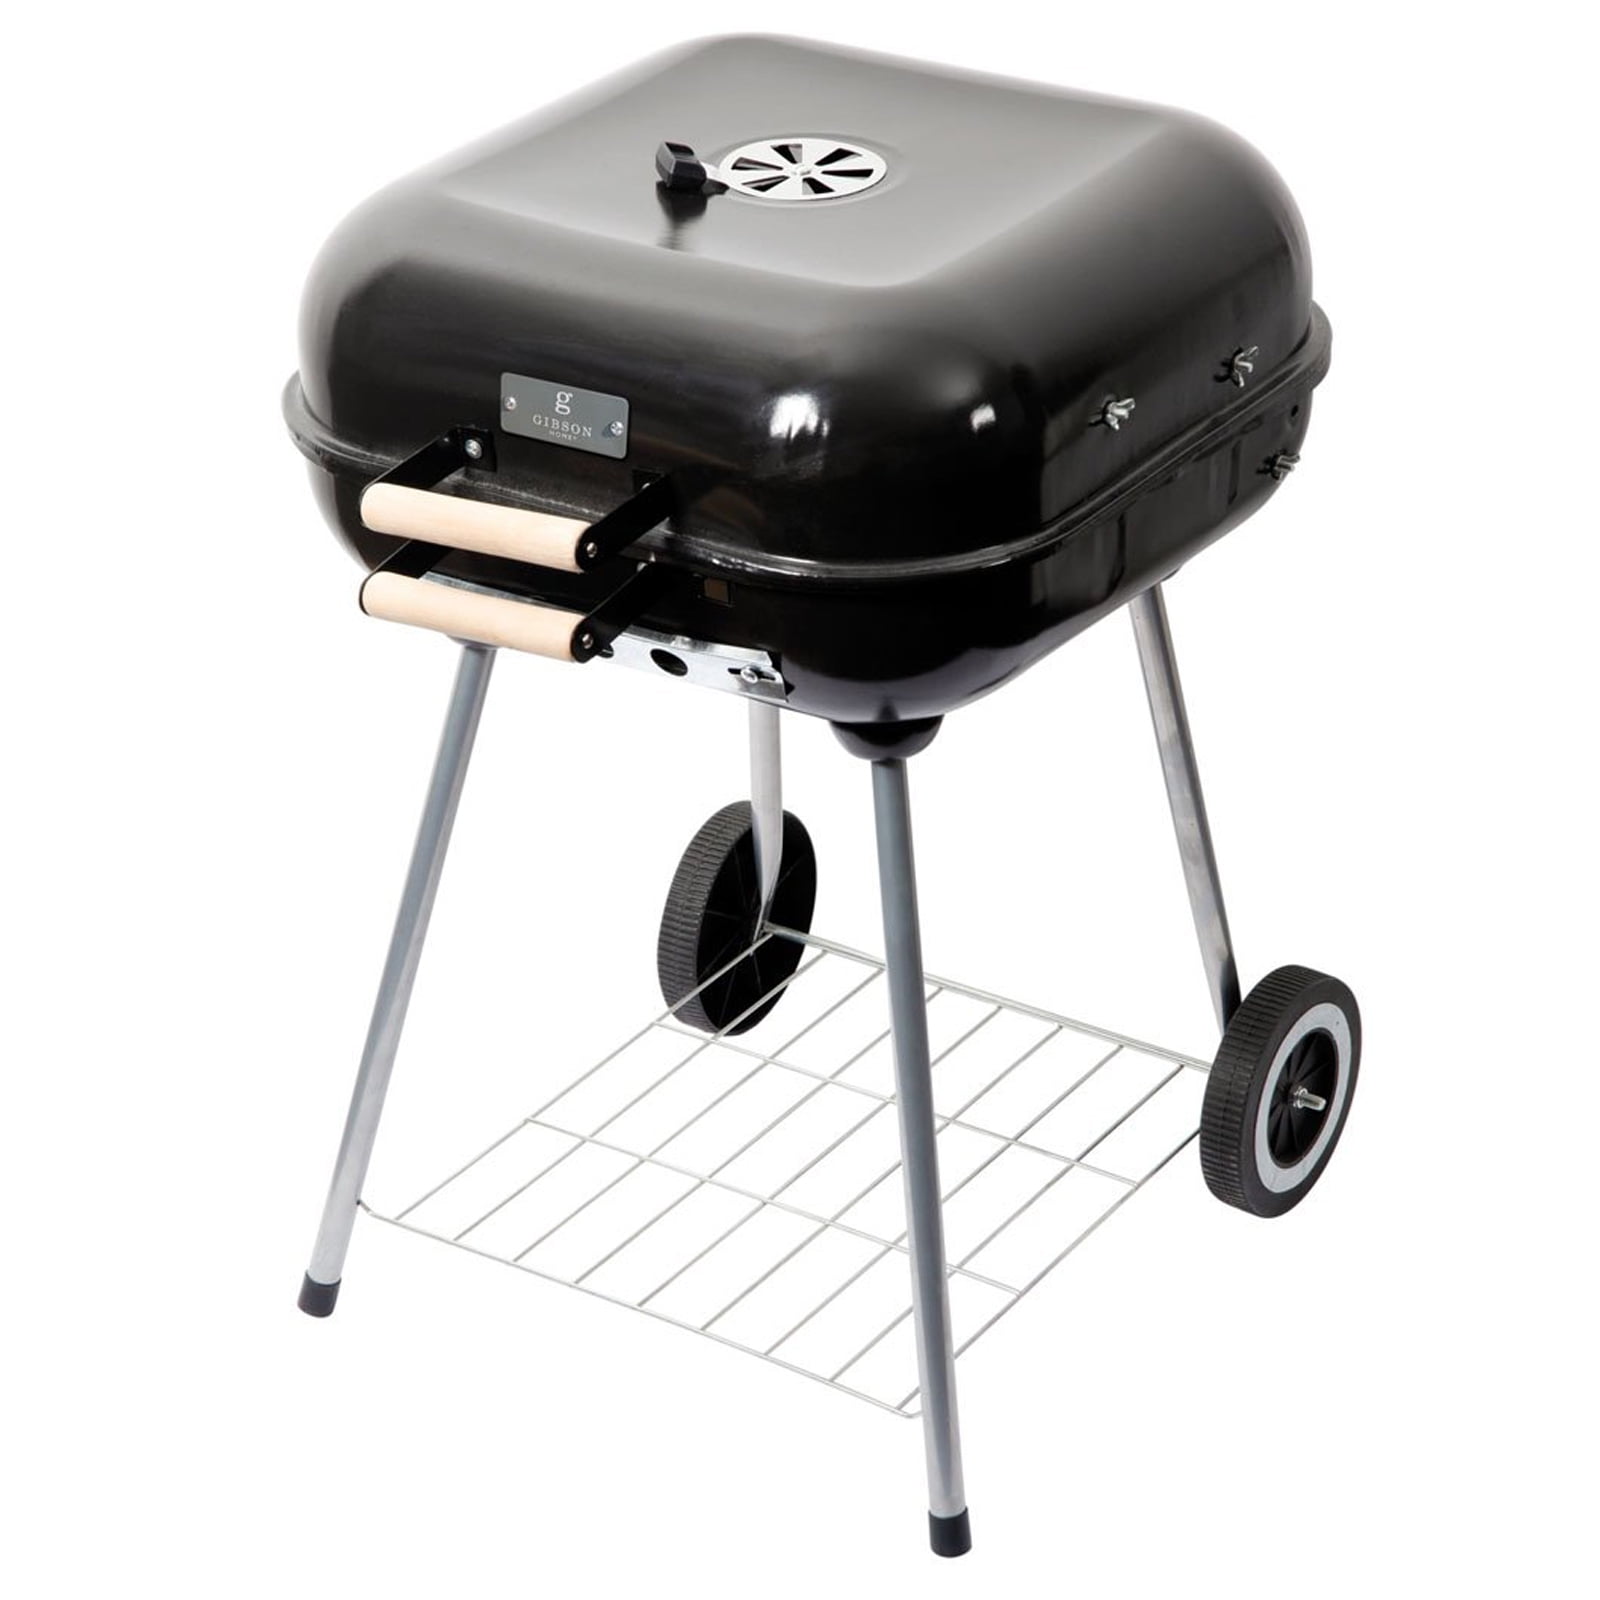 HomeyMosaic 19 Steel Porcelain Portable Outdoor Charcoal Barbecue Grill Hamburger Grill Commercial Machine Square BBQ Grill,YH19022 Black